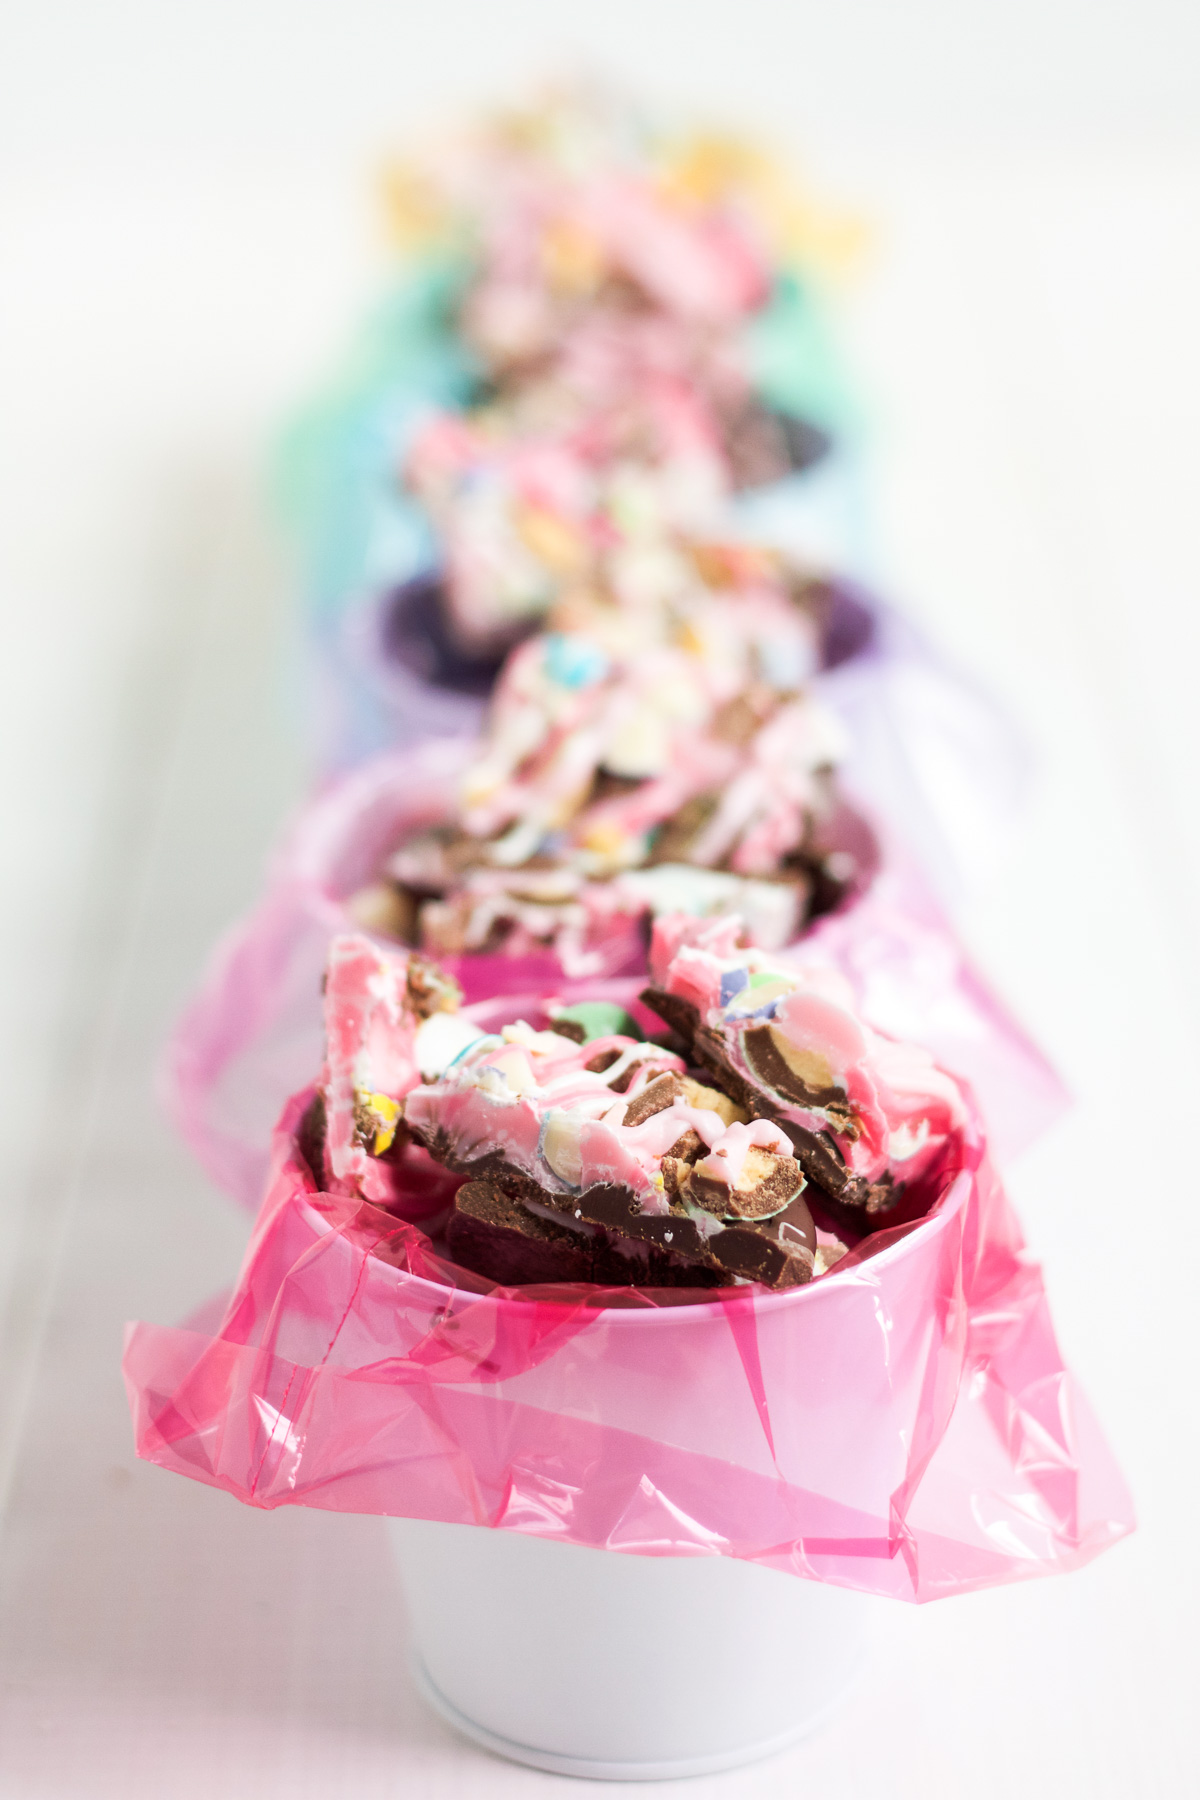 Make this yummy white chocolate Easter candy bark!